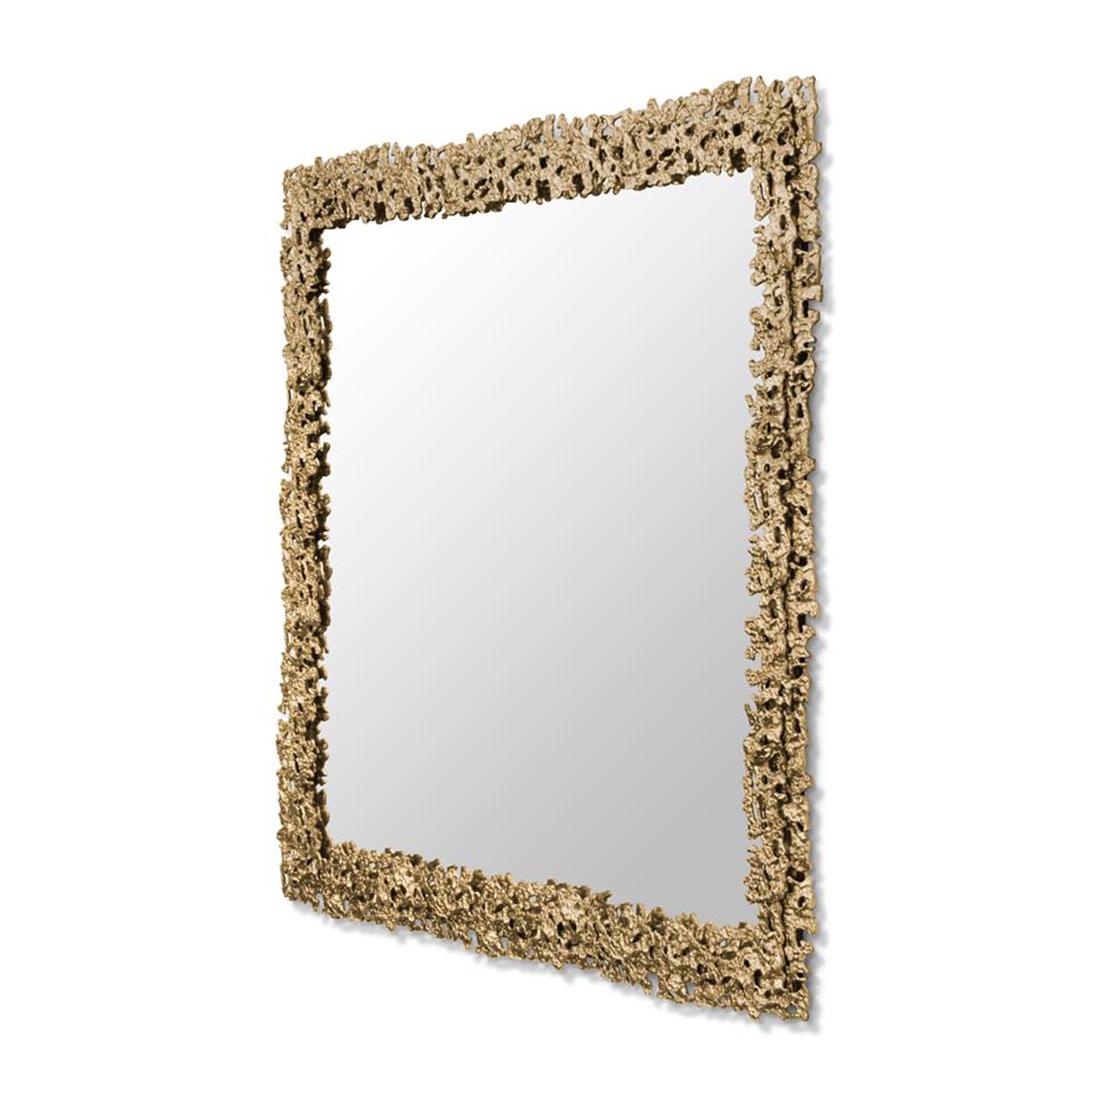 Mirror lava square with casted solid brass
frame in matte finish and with clear glass mirror.